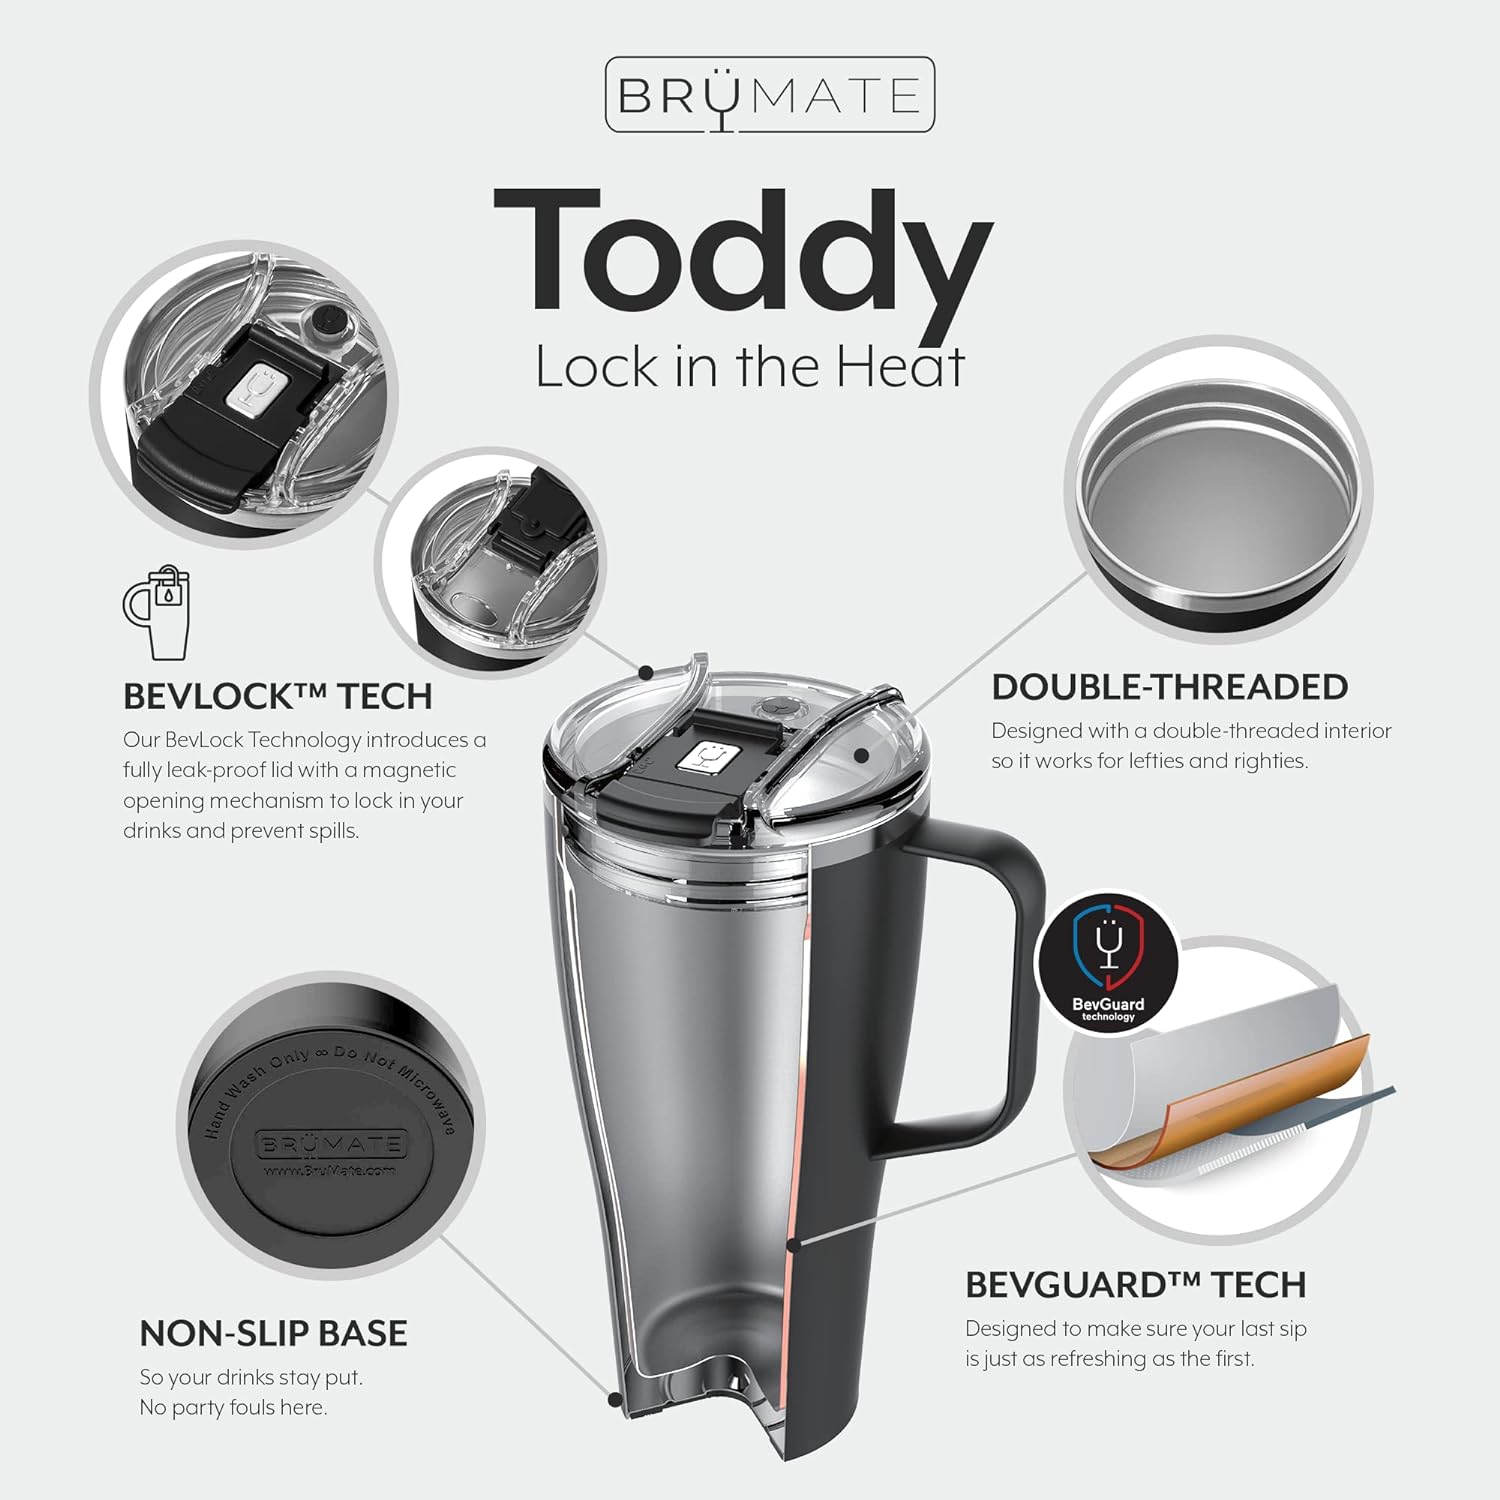 BrüMate Toddy XL - 32oz 100% Leak Proof Insulated Coffee Mug with Handle & Lid - Stainless Steel Coffee Travel Mug - Double Walled Coffee Cup (Matte Gray)